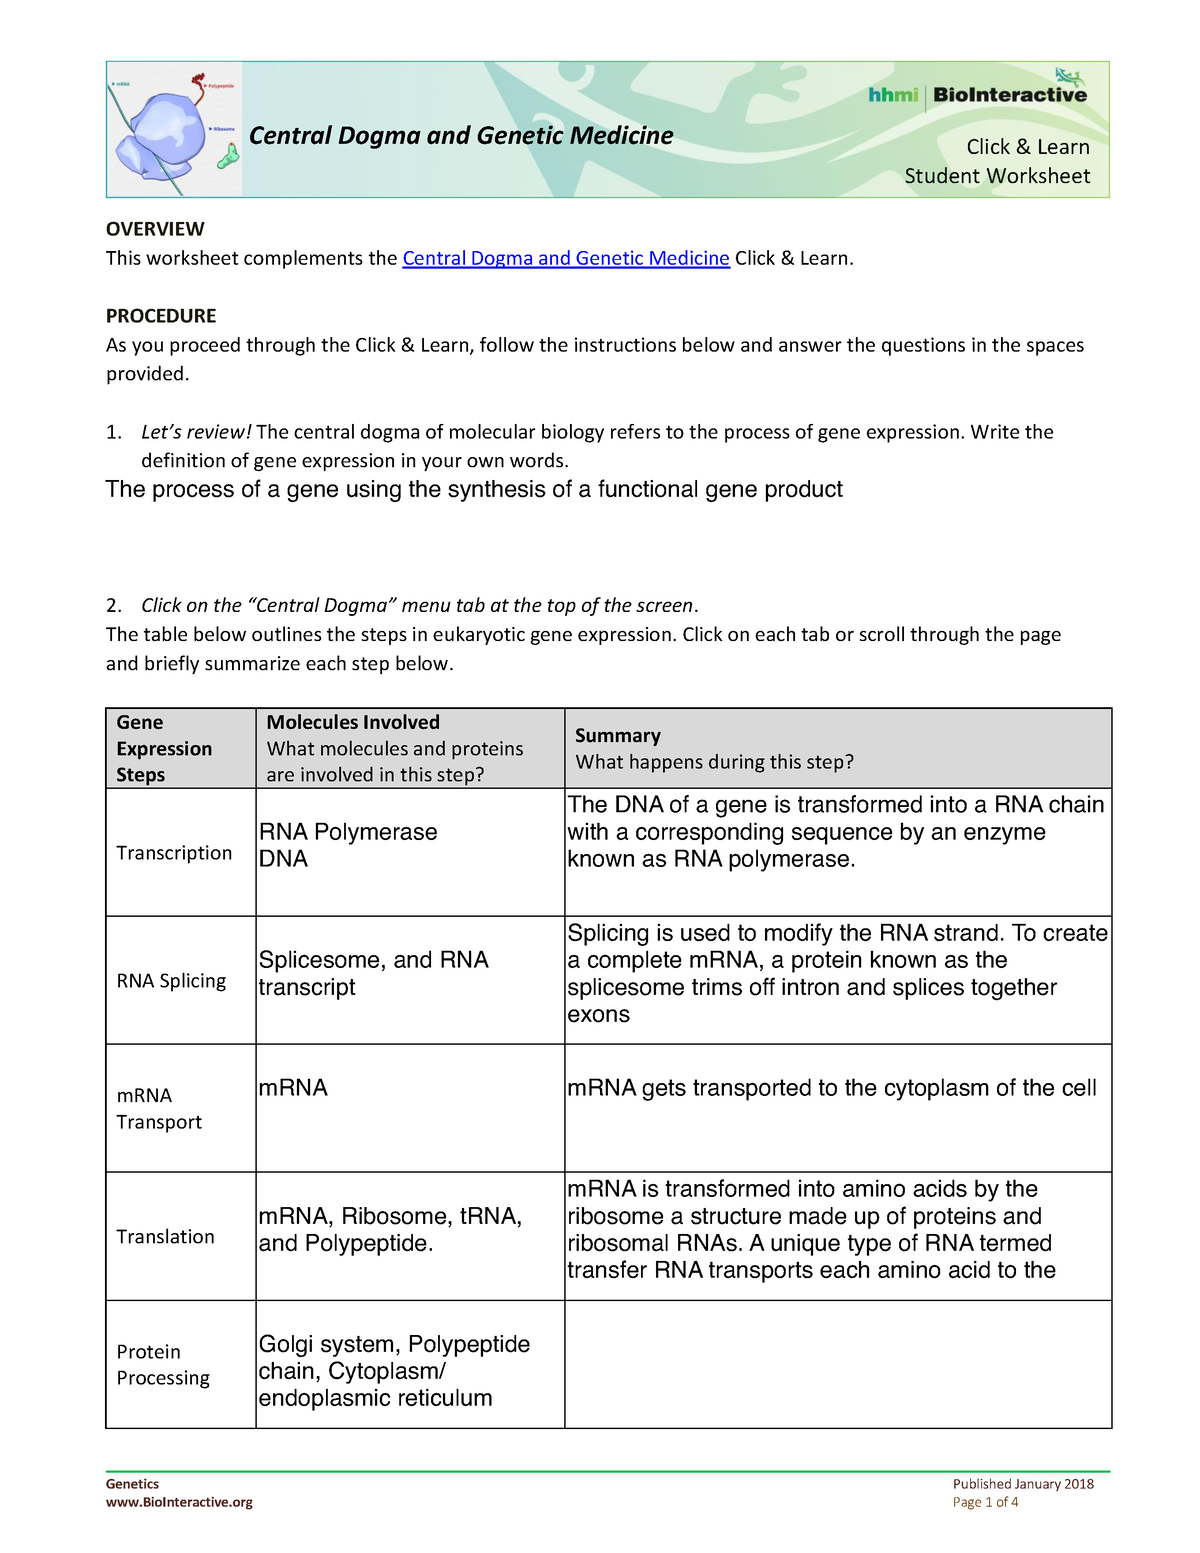 protein-synthesis-worksheet-click-learn-student-worksheet-central-dogma-and-genetic-medicine